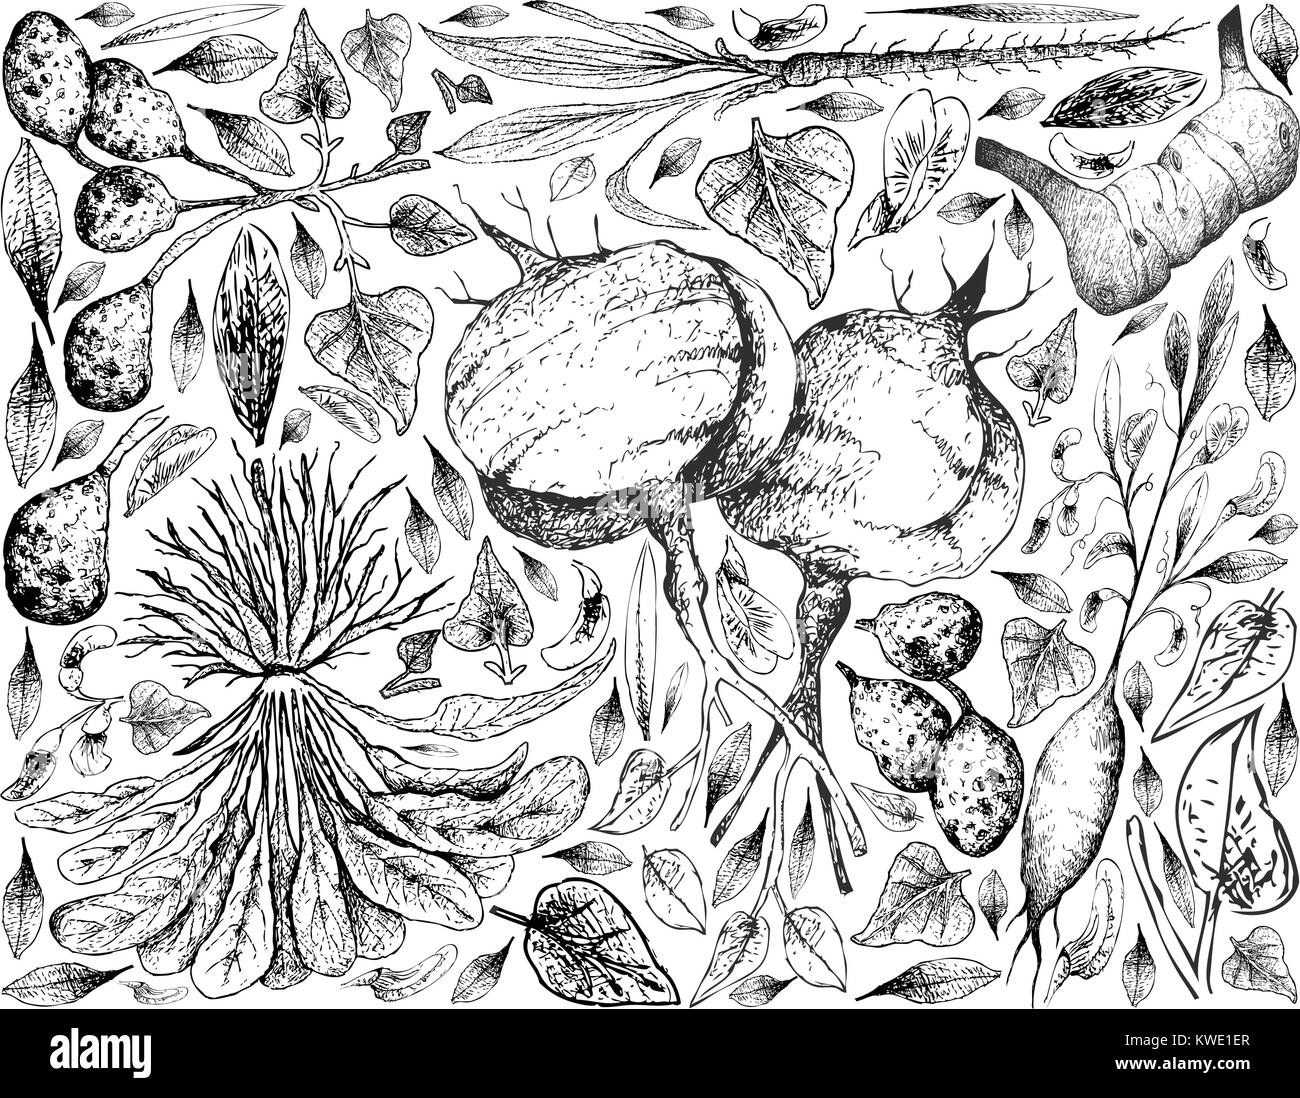 Root and Tuberous Vegetables, Illustration Background of Hand Drawn Sketch of Ulluco, Skirret, Scorzonera, Jicama, Galangal and Earthnut Pea Plants Is Stock Vector